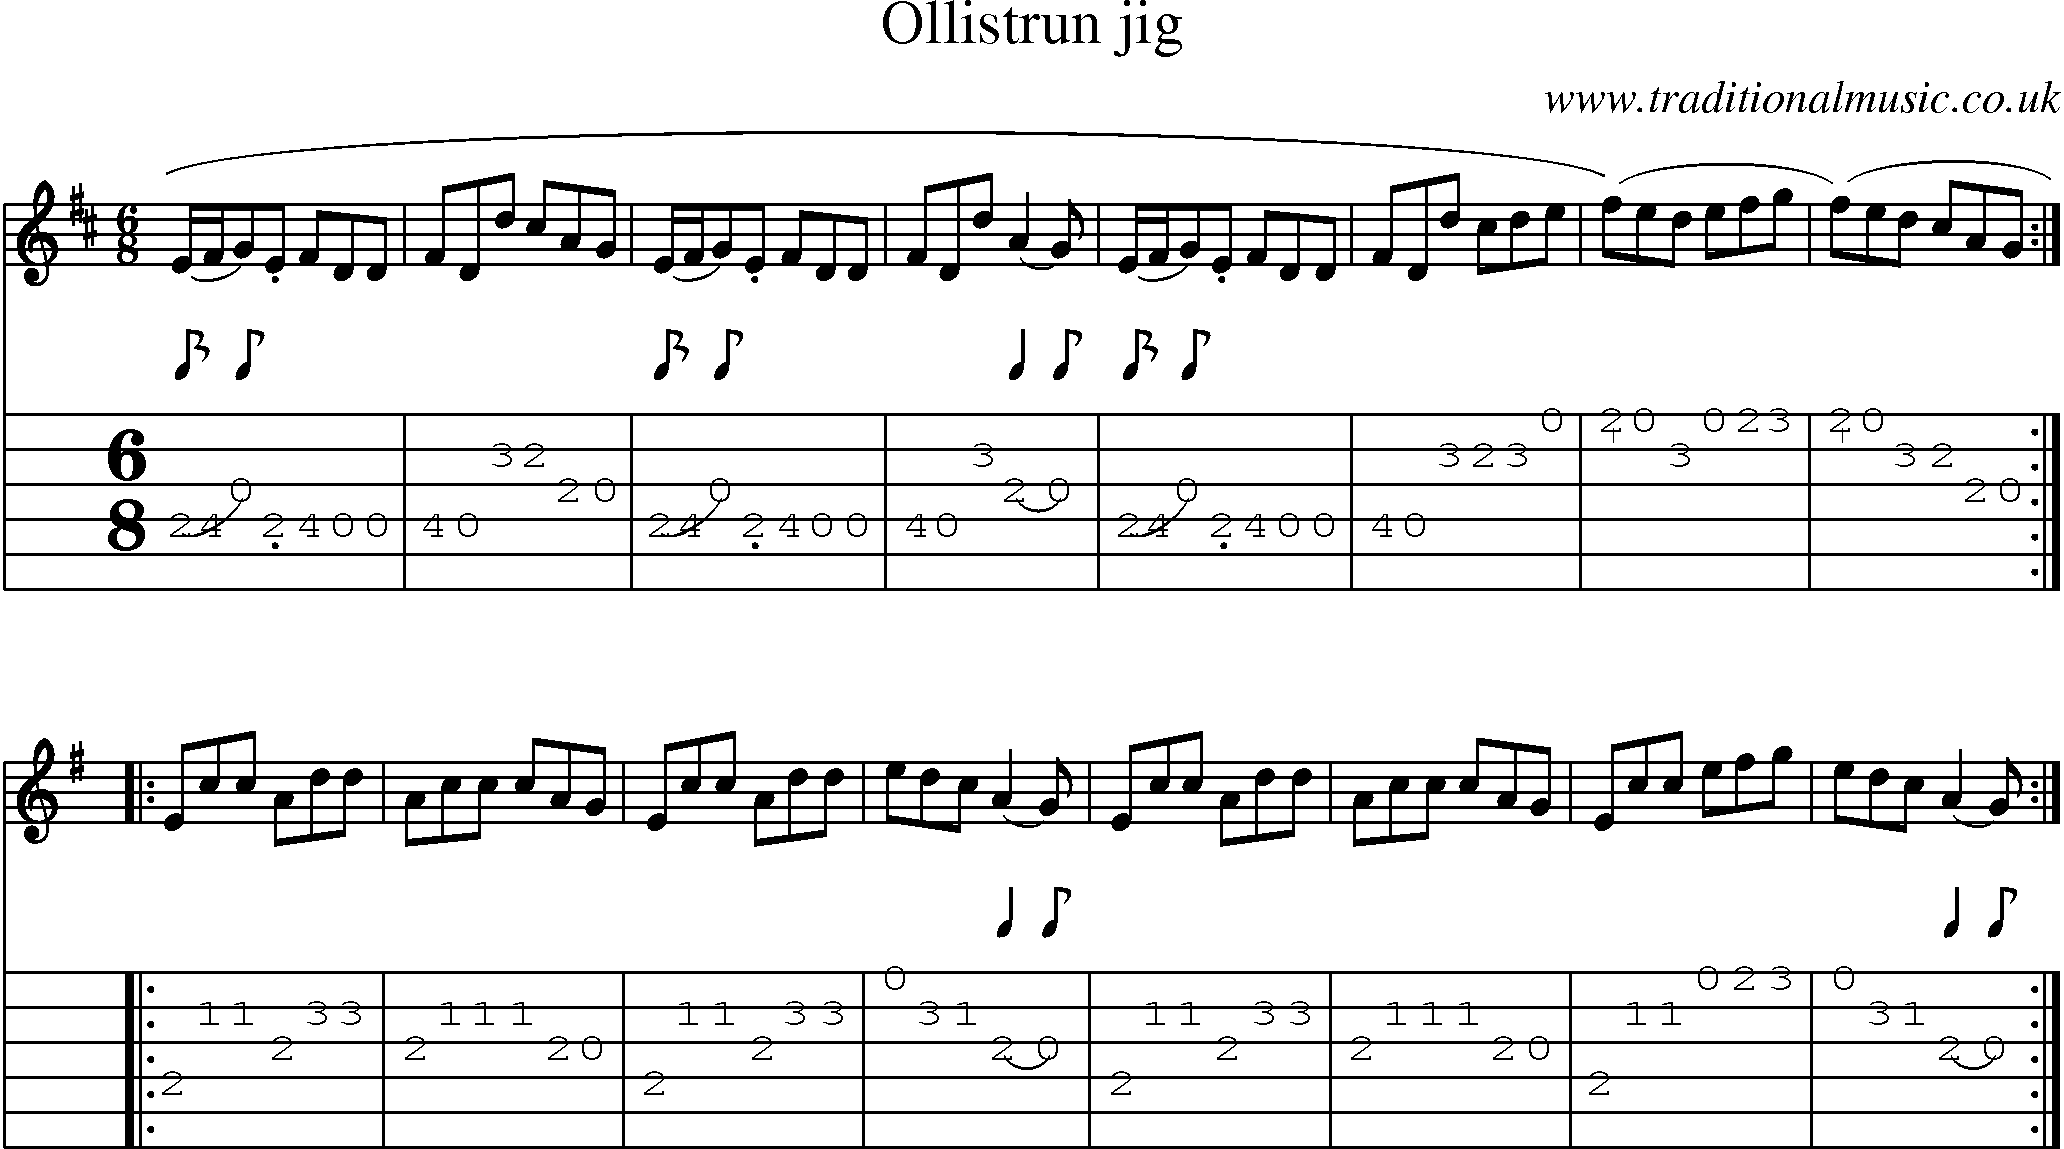 Music Score and Guitar Tabs for Ollistrun Jig